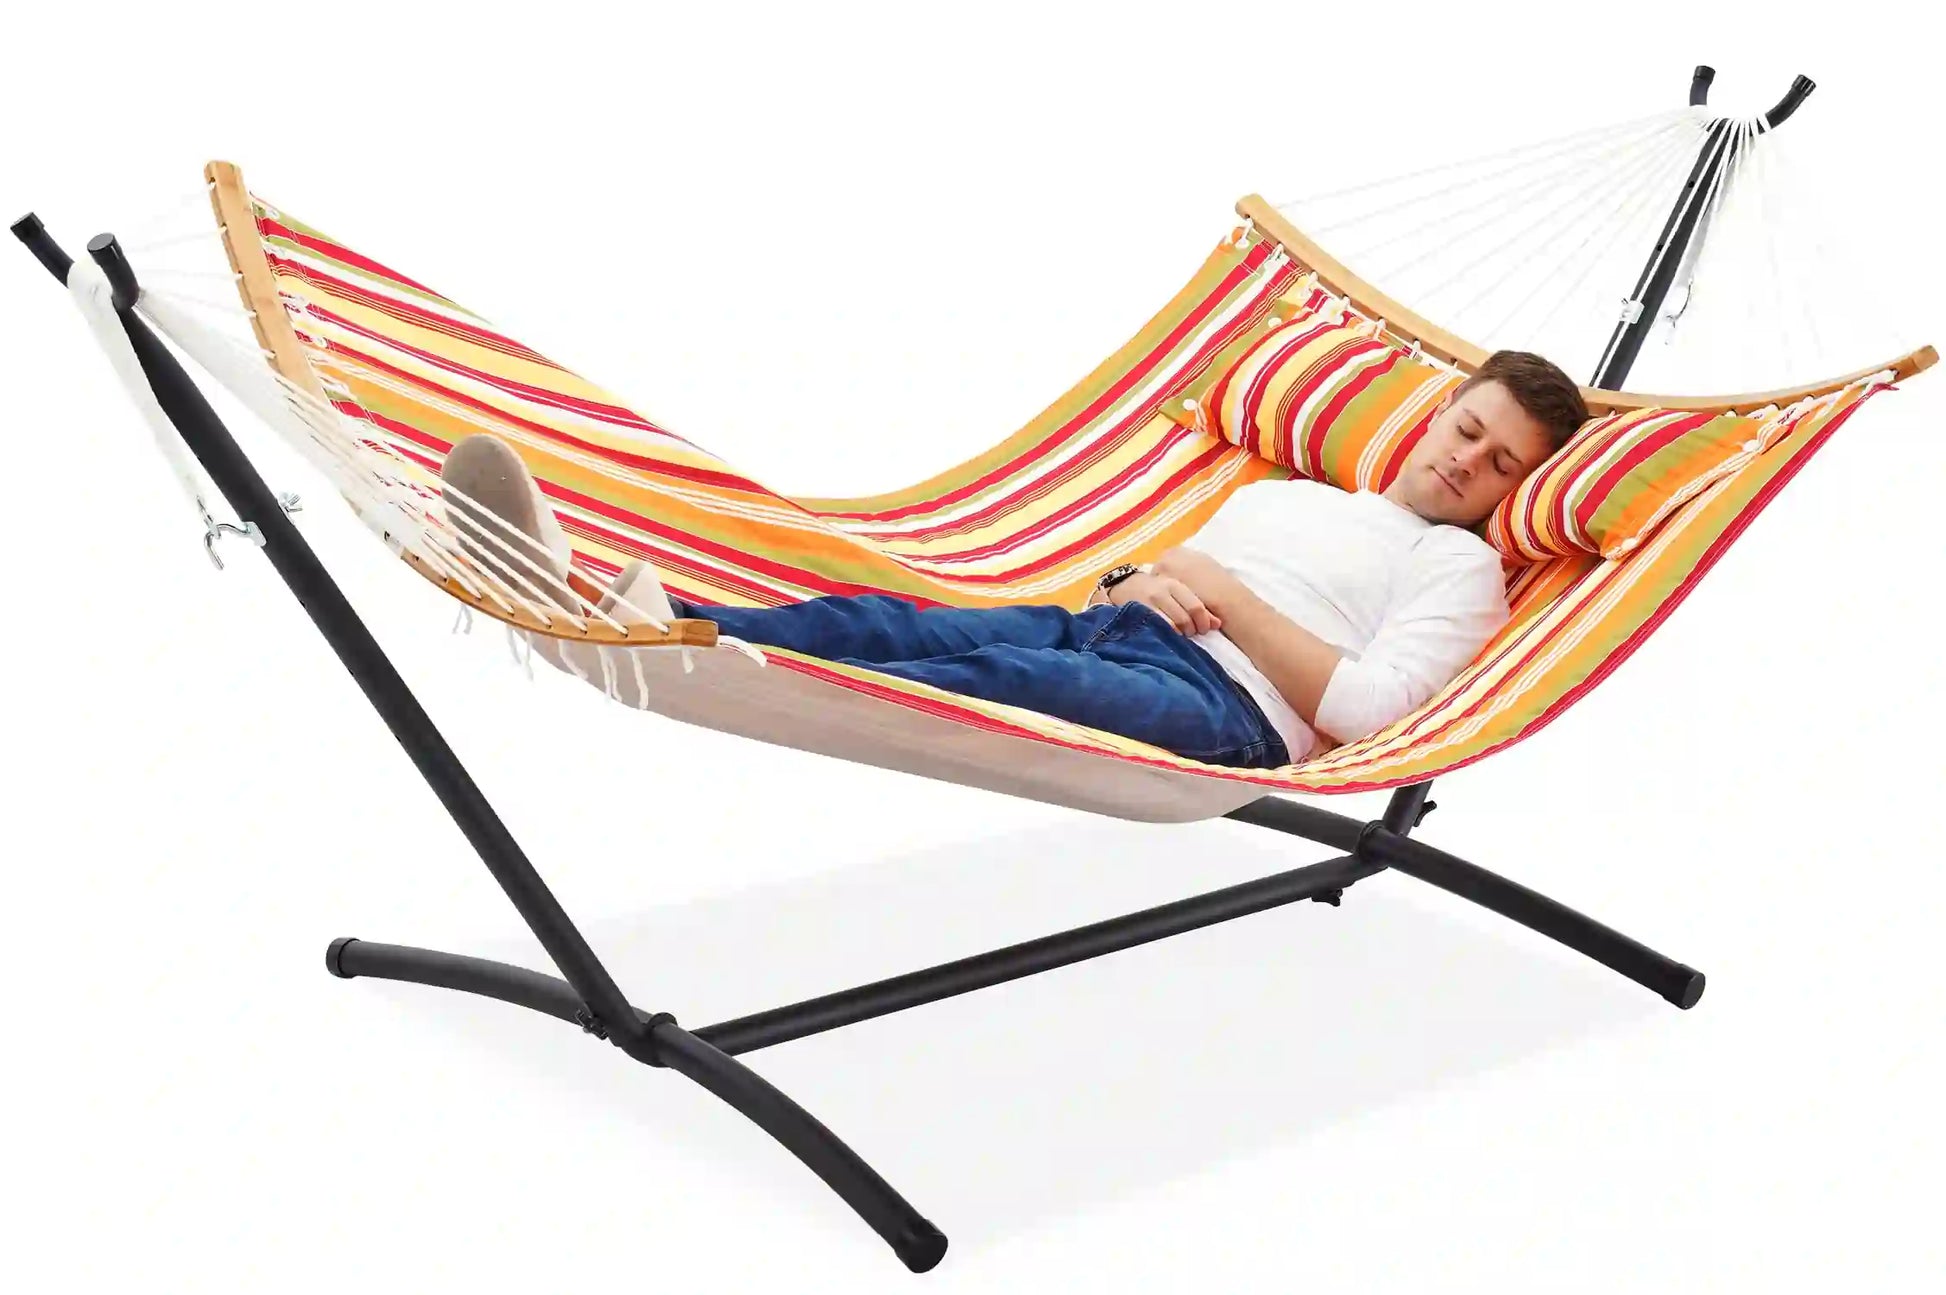 9 FT Space-Saving Hammock with Stand - Orange Stripes